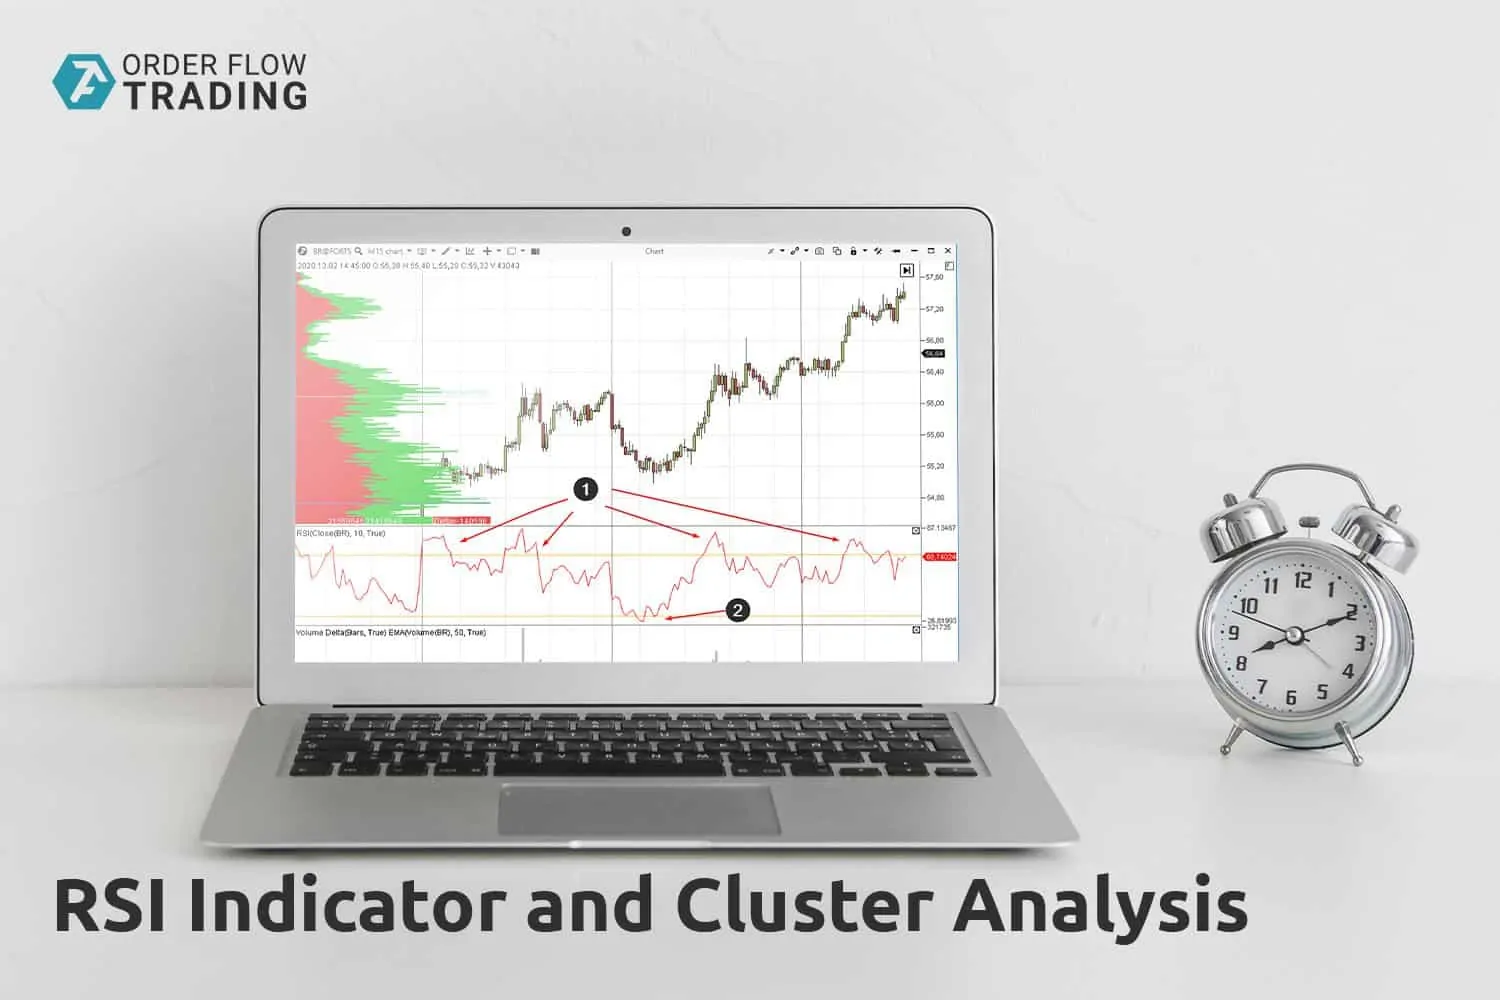 How to combine the RSI indicator and cluster analysis